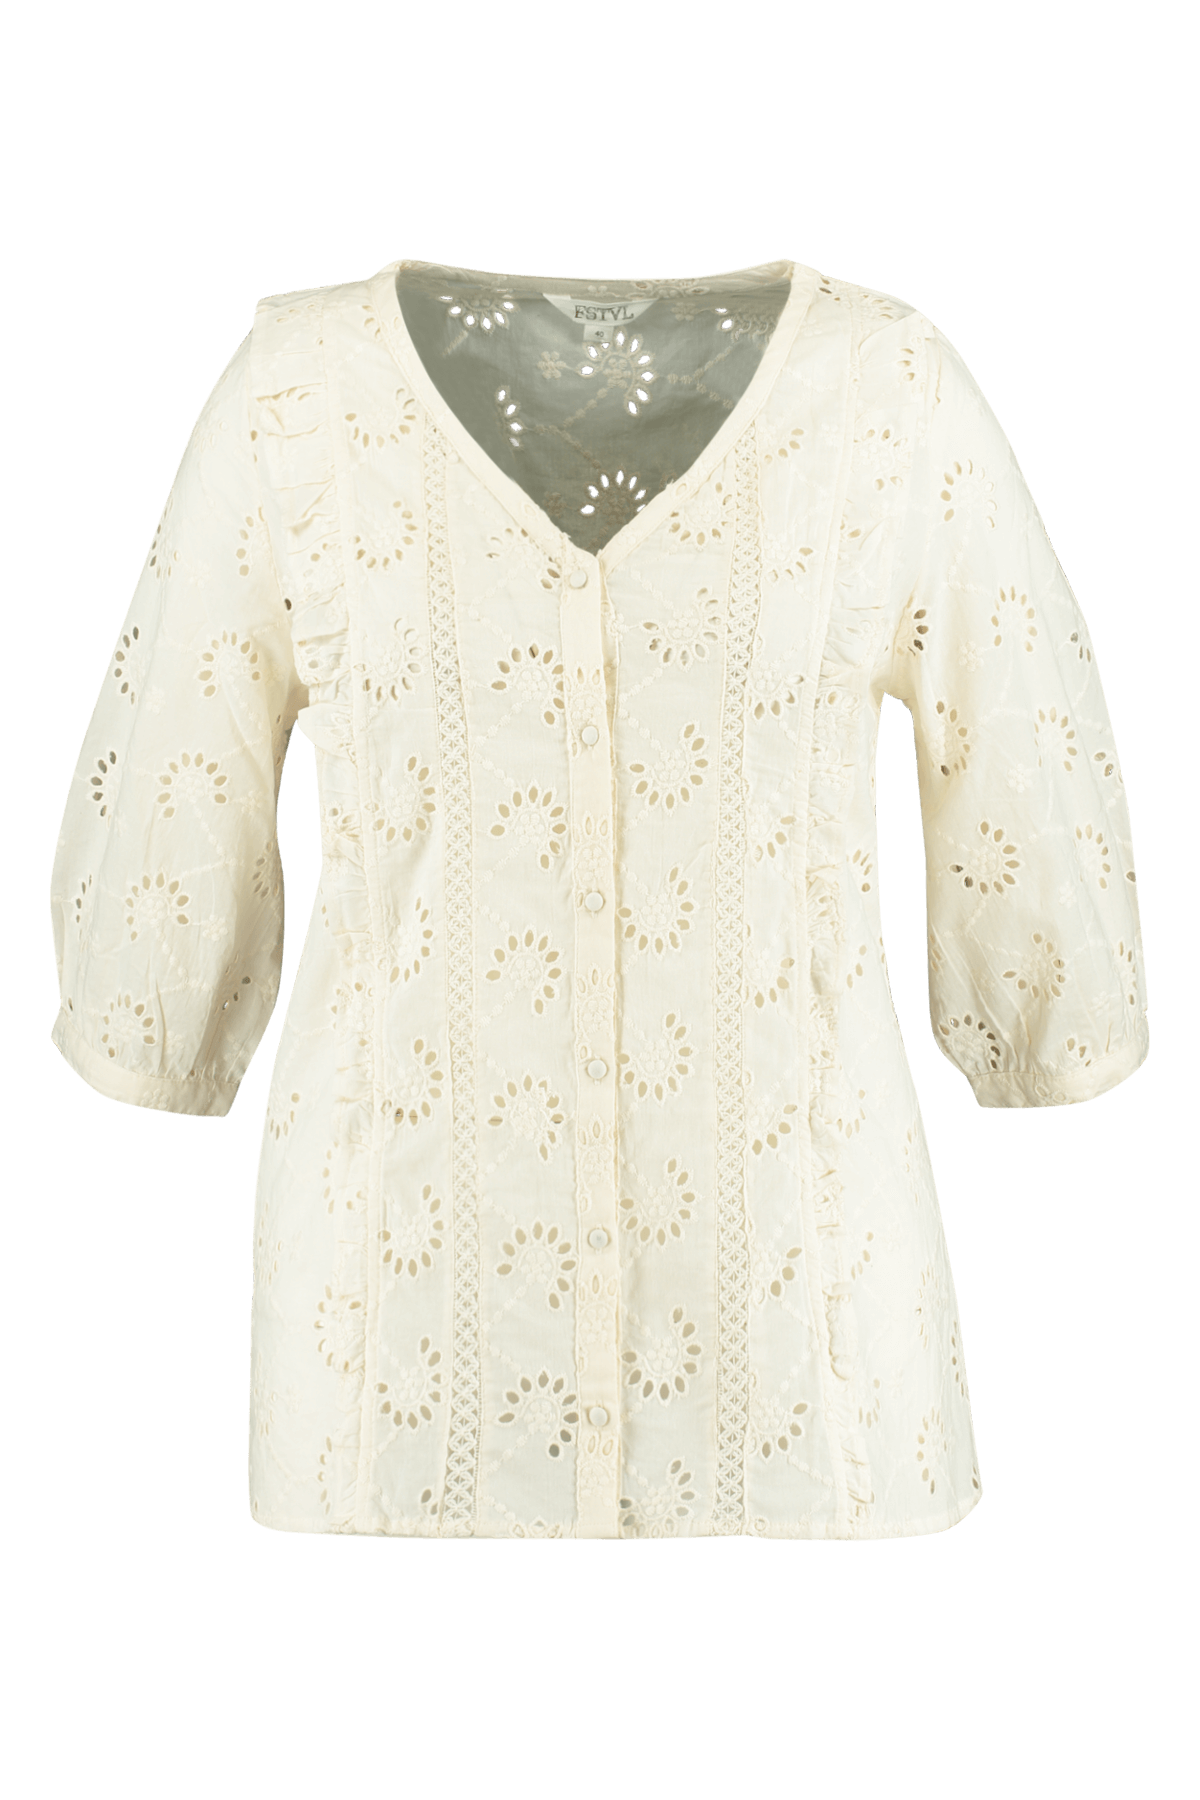 Broderie angliase blouse image 1